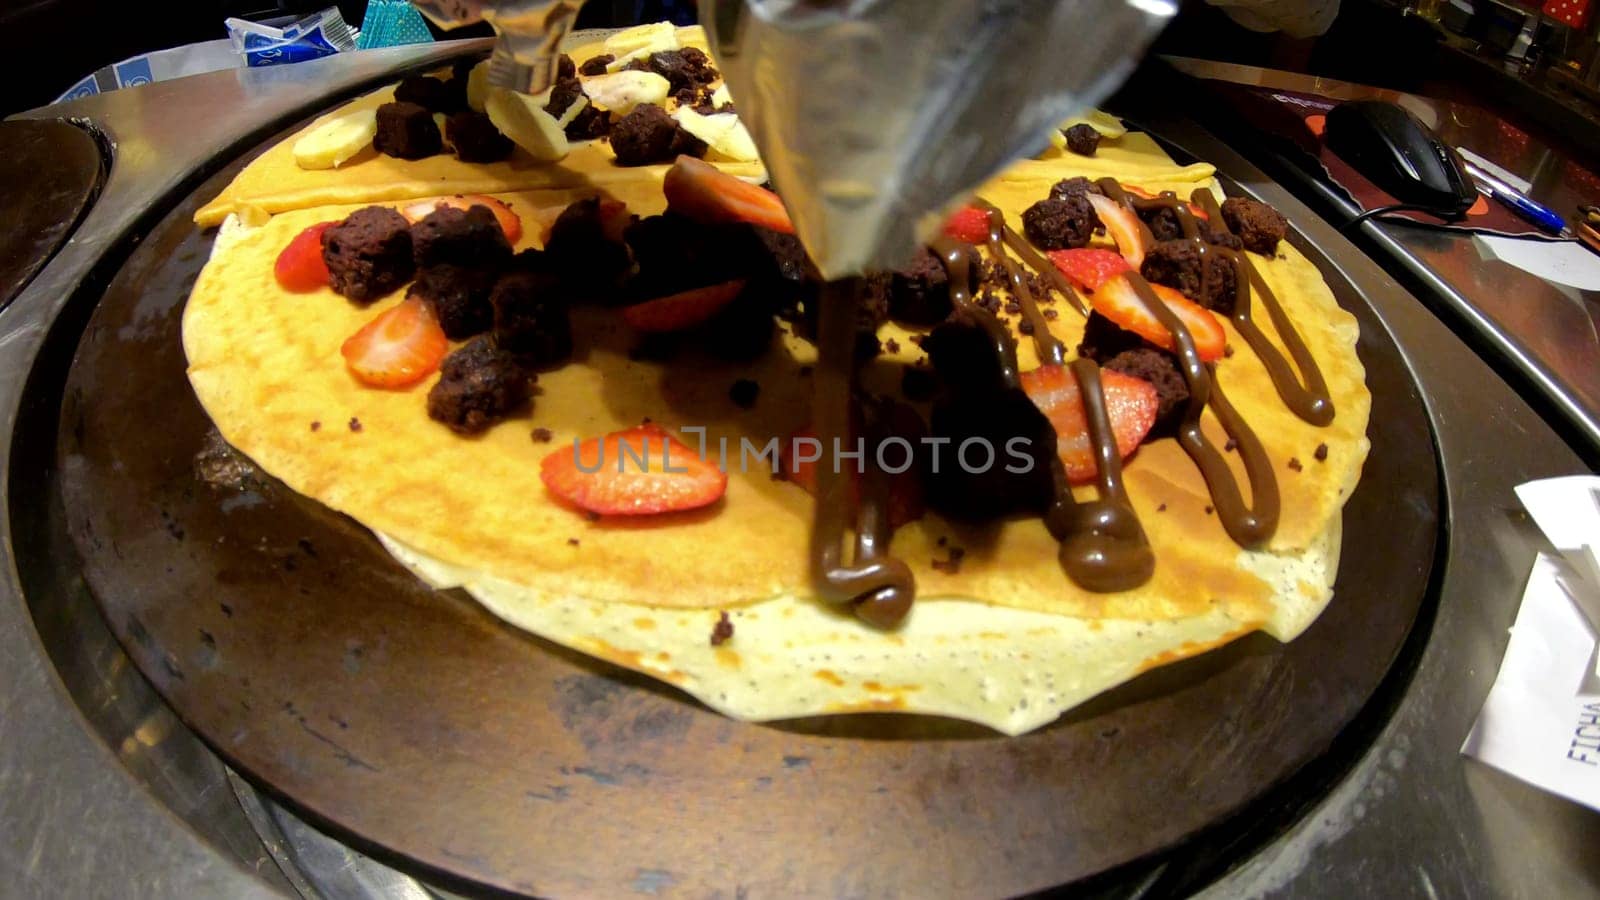 Fresh crepe with chocolate sauce and strawberries by Peruphotoart